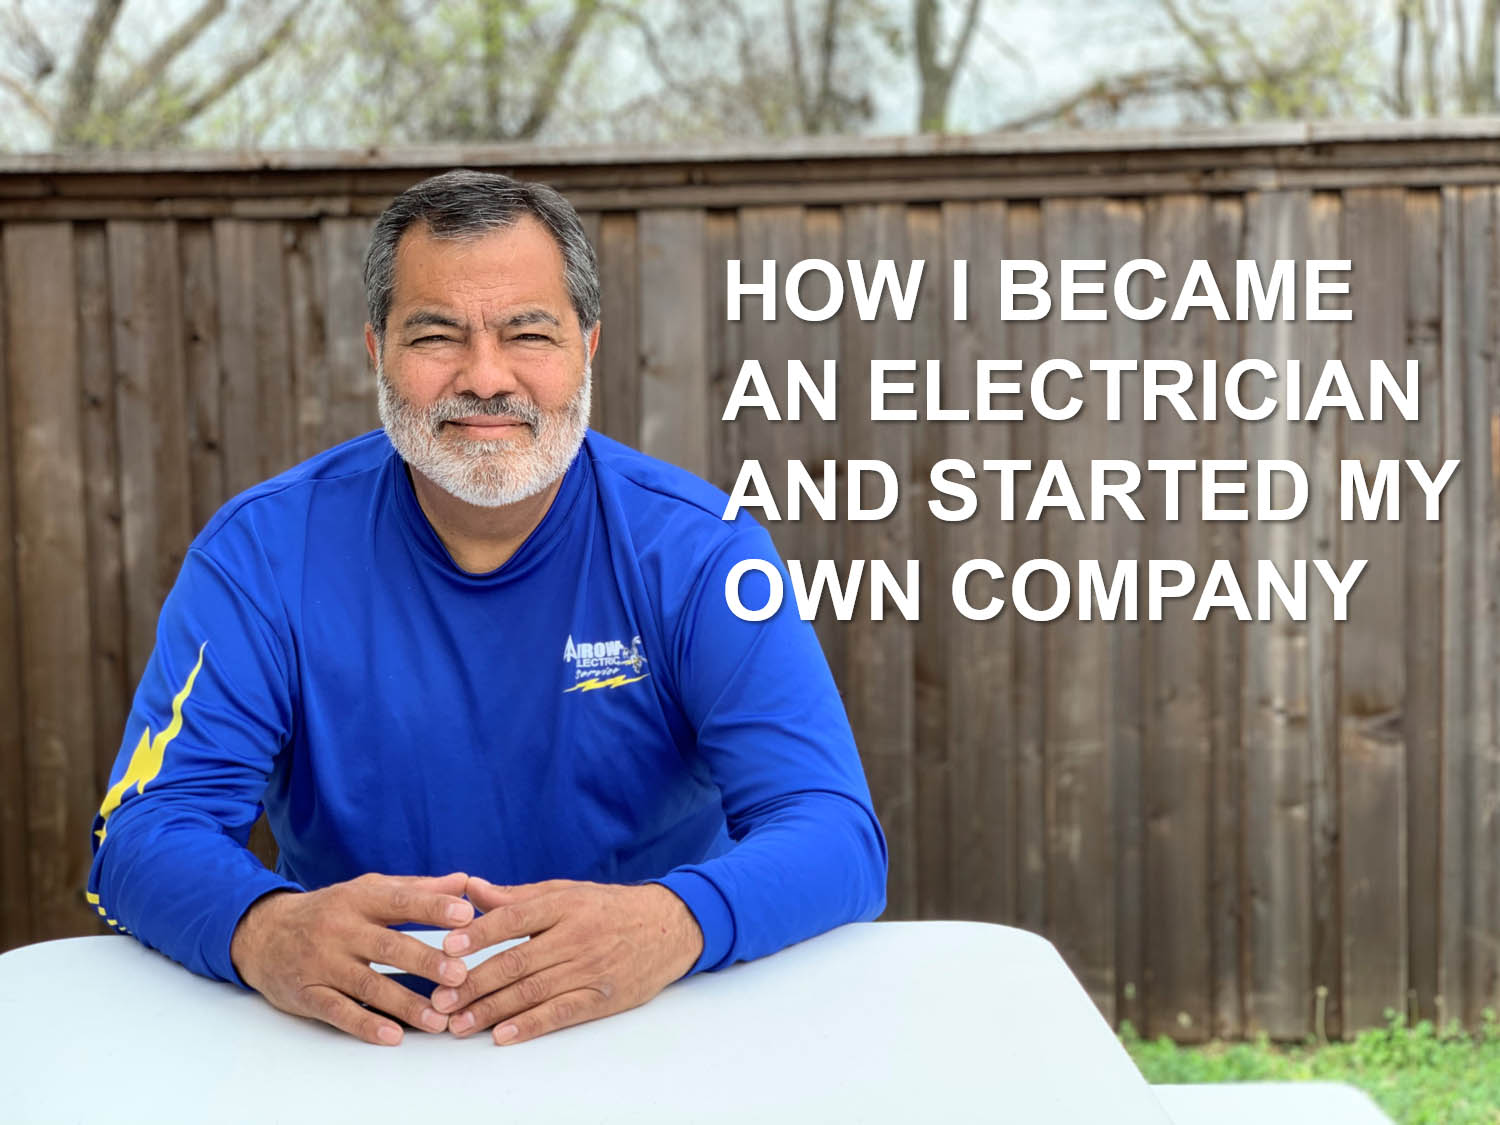 Let's Meet Henry Lucero, Master Electrician, and the owner of Arrow Electric Service